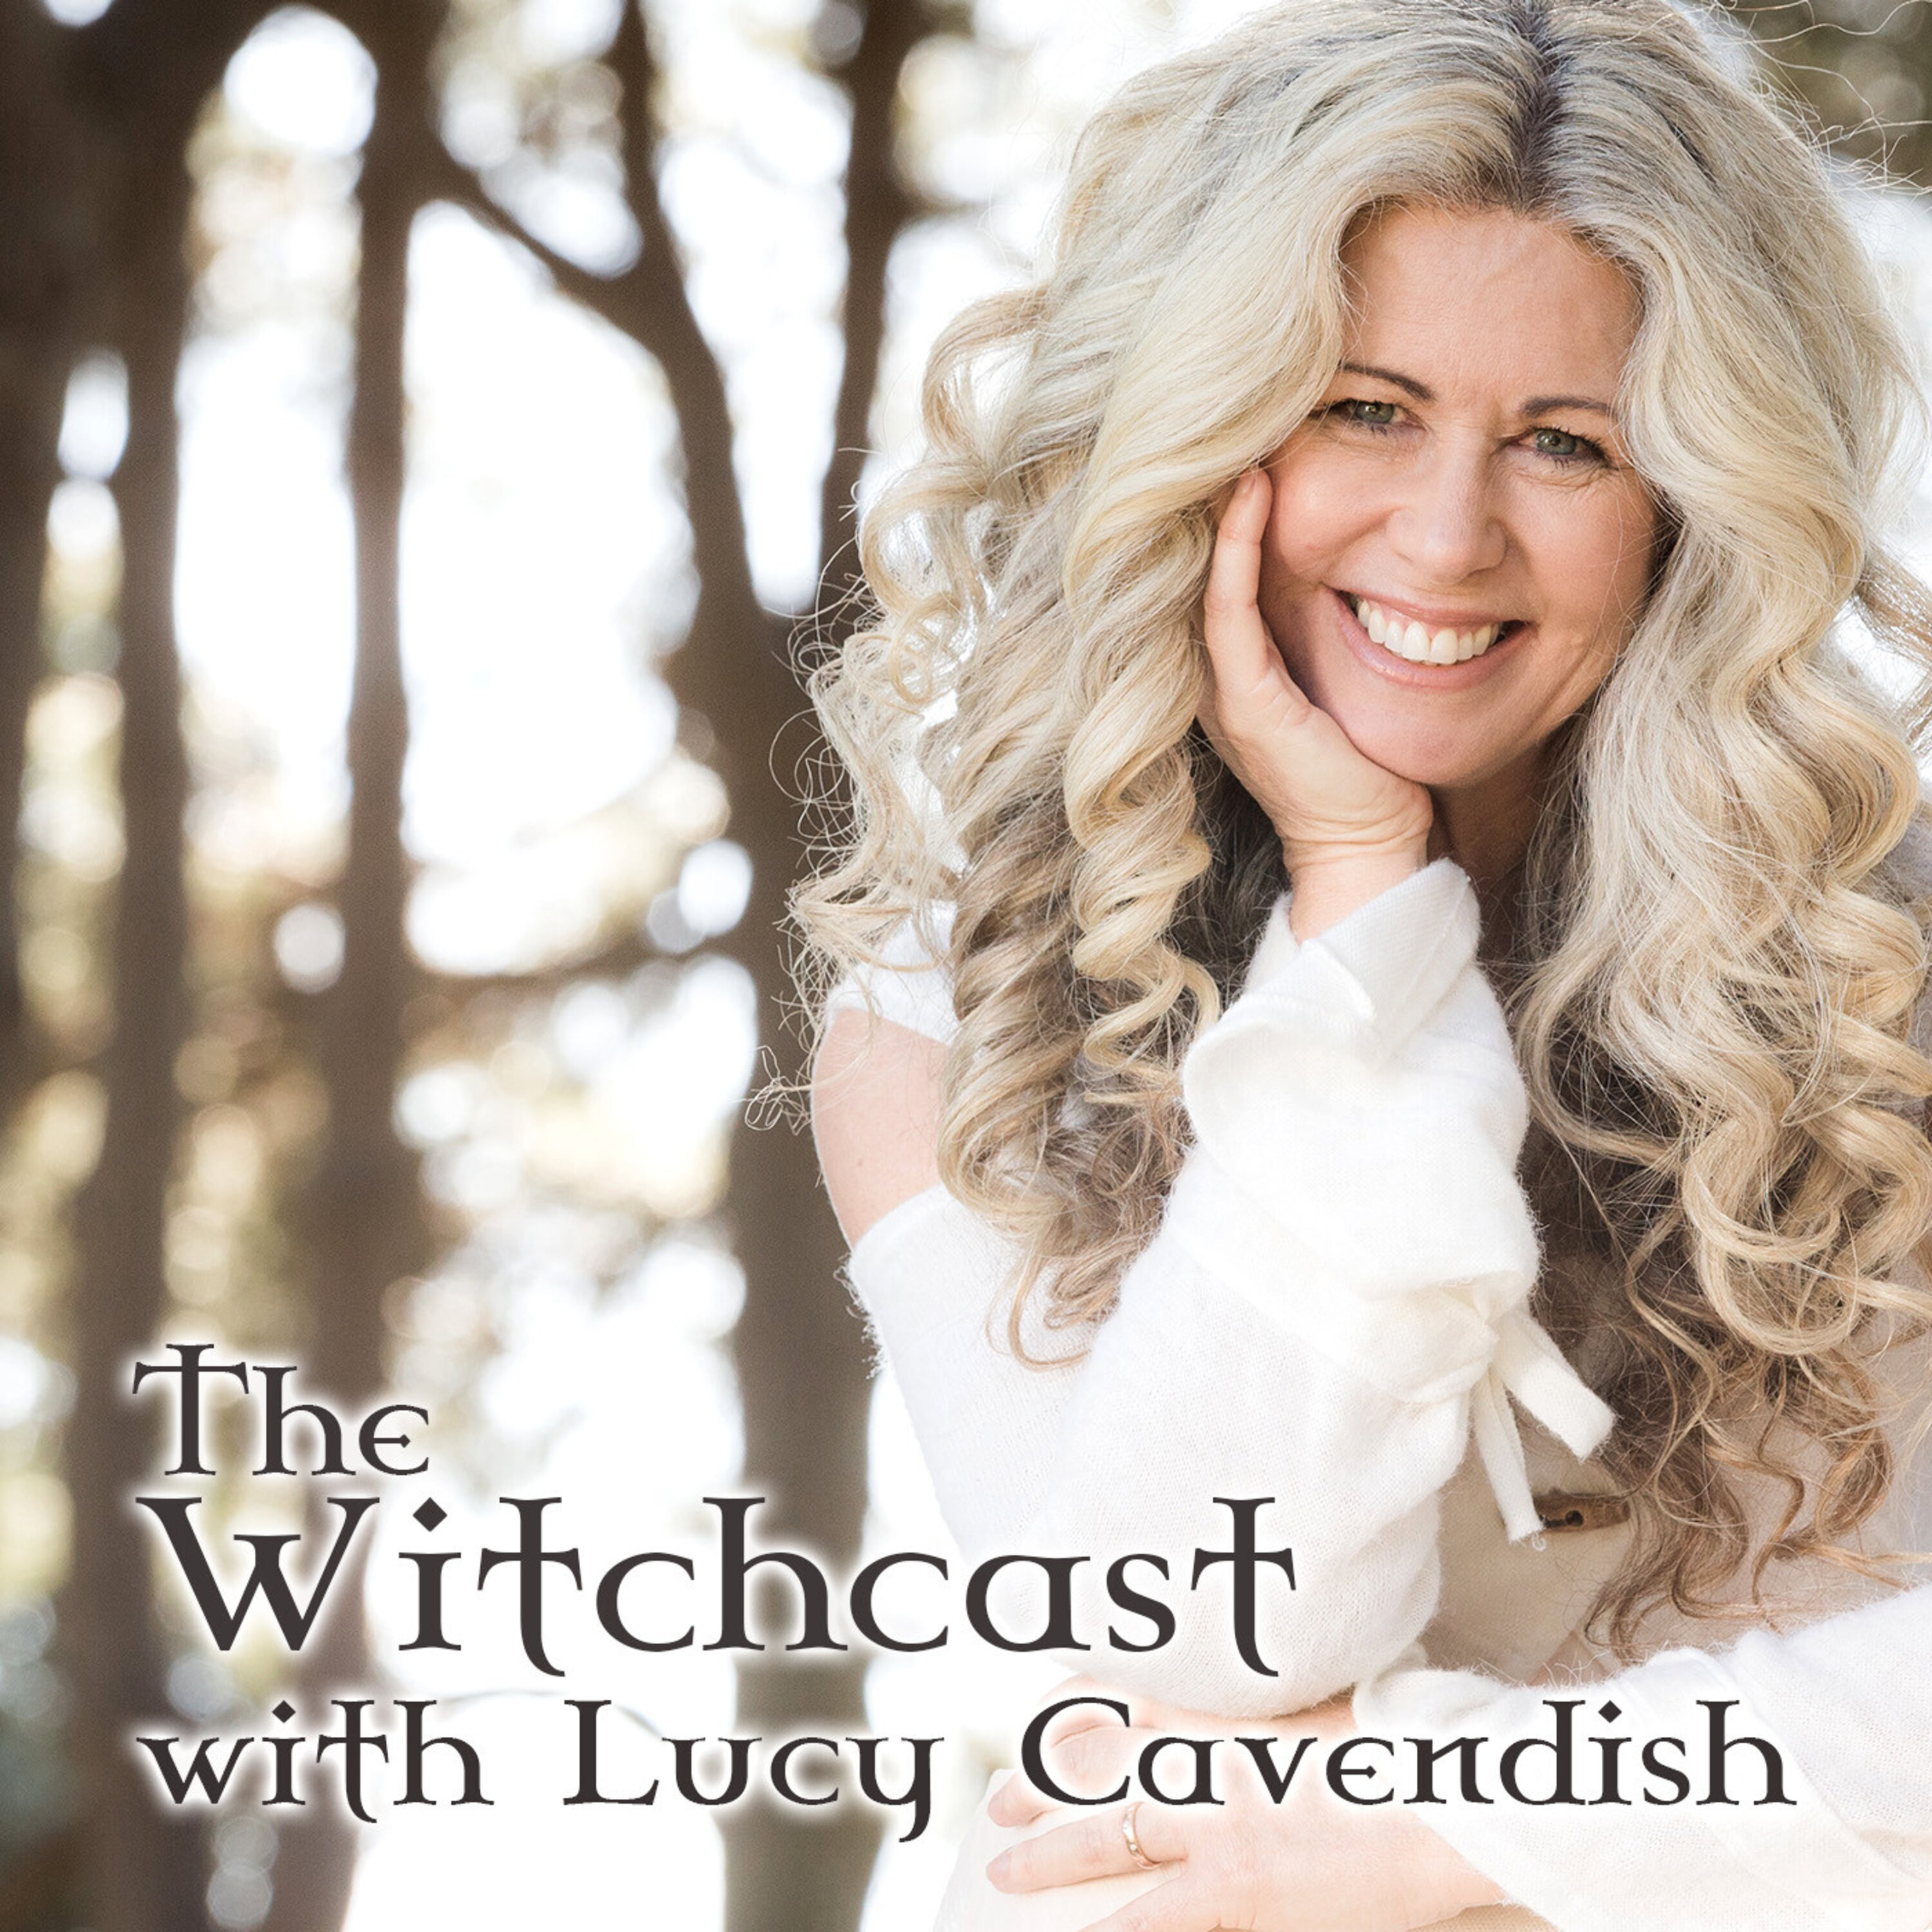 The Witchcast With Lucy Cavendish podcast show image